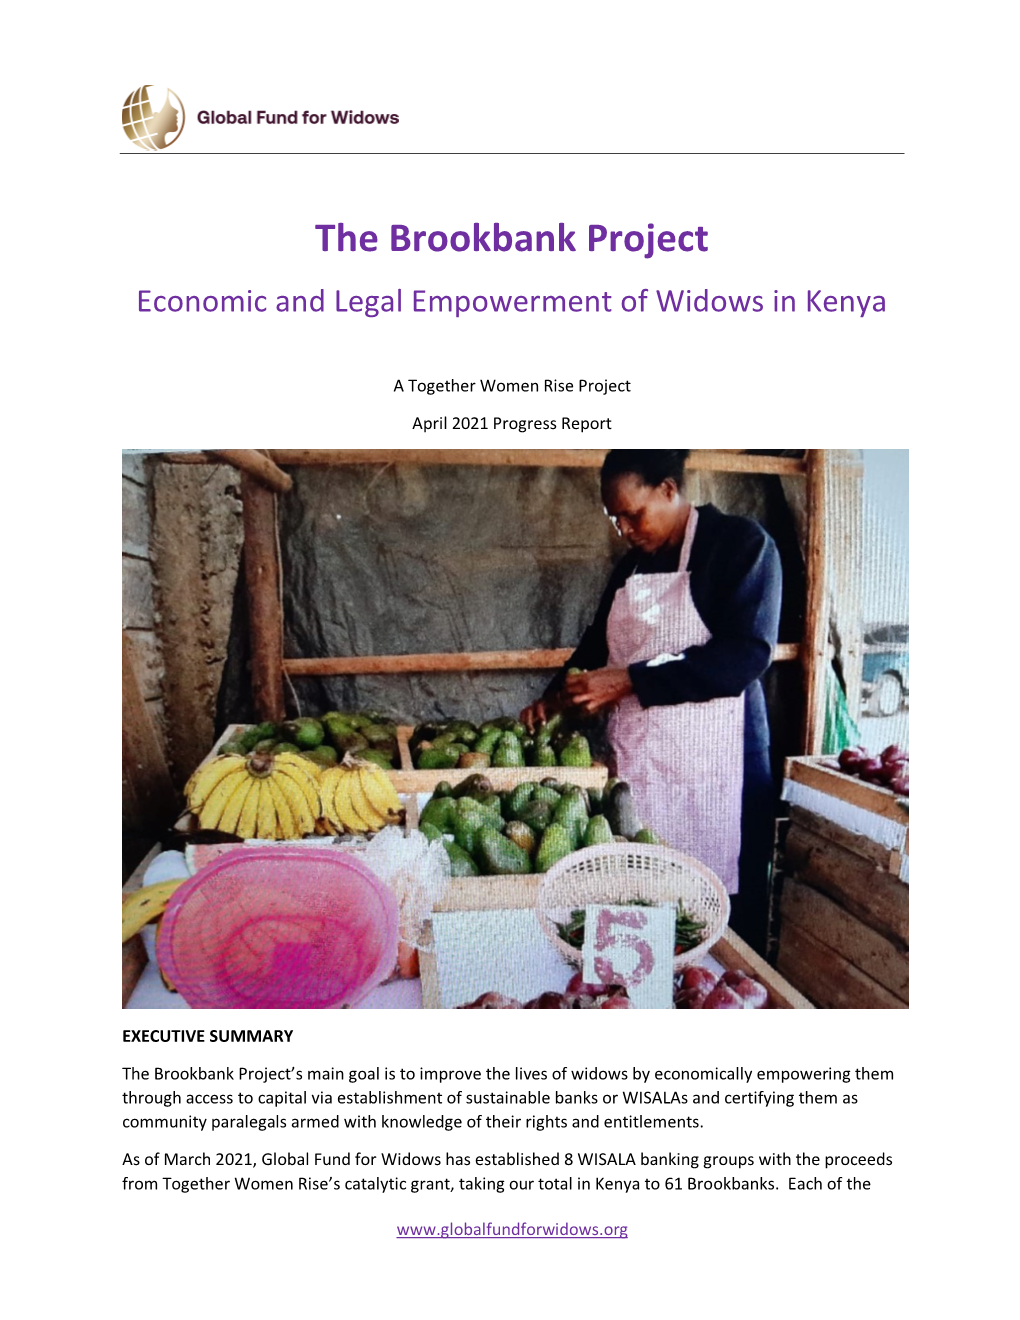 The Brookbank Project Economic and Legal Empowerment of Widows in Kenya